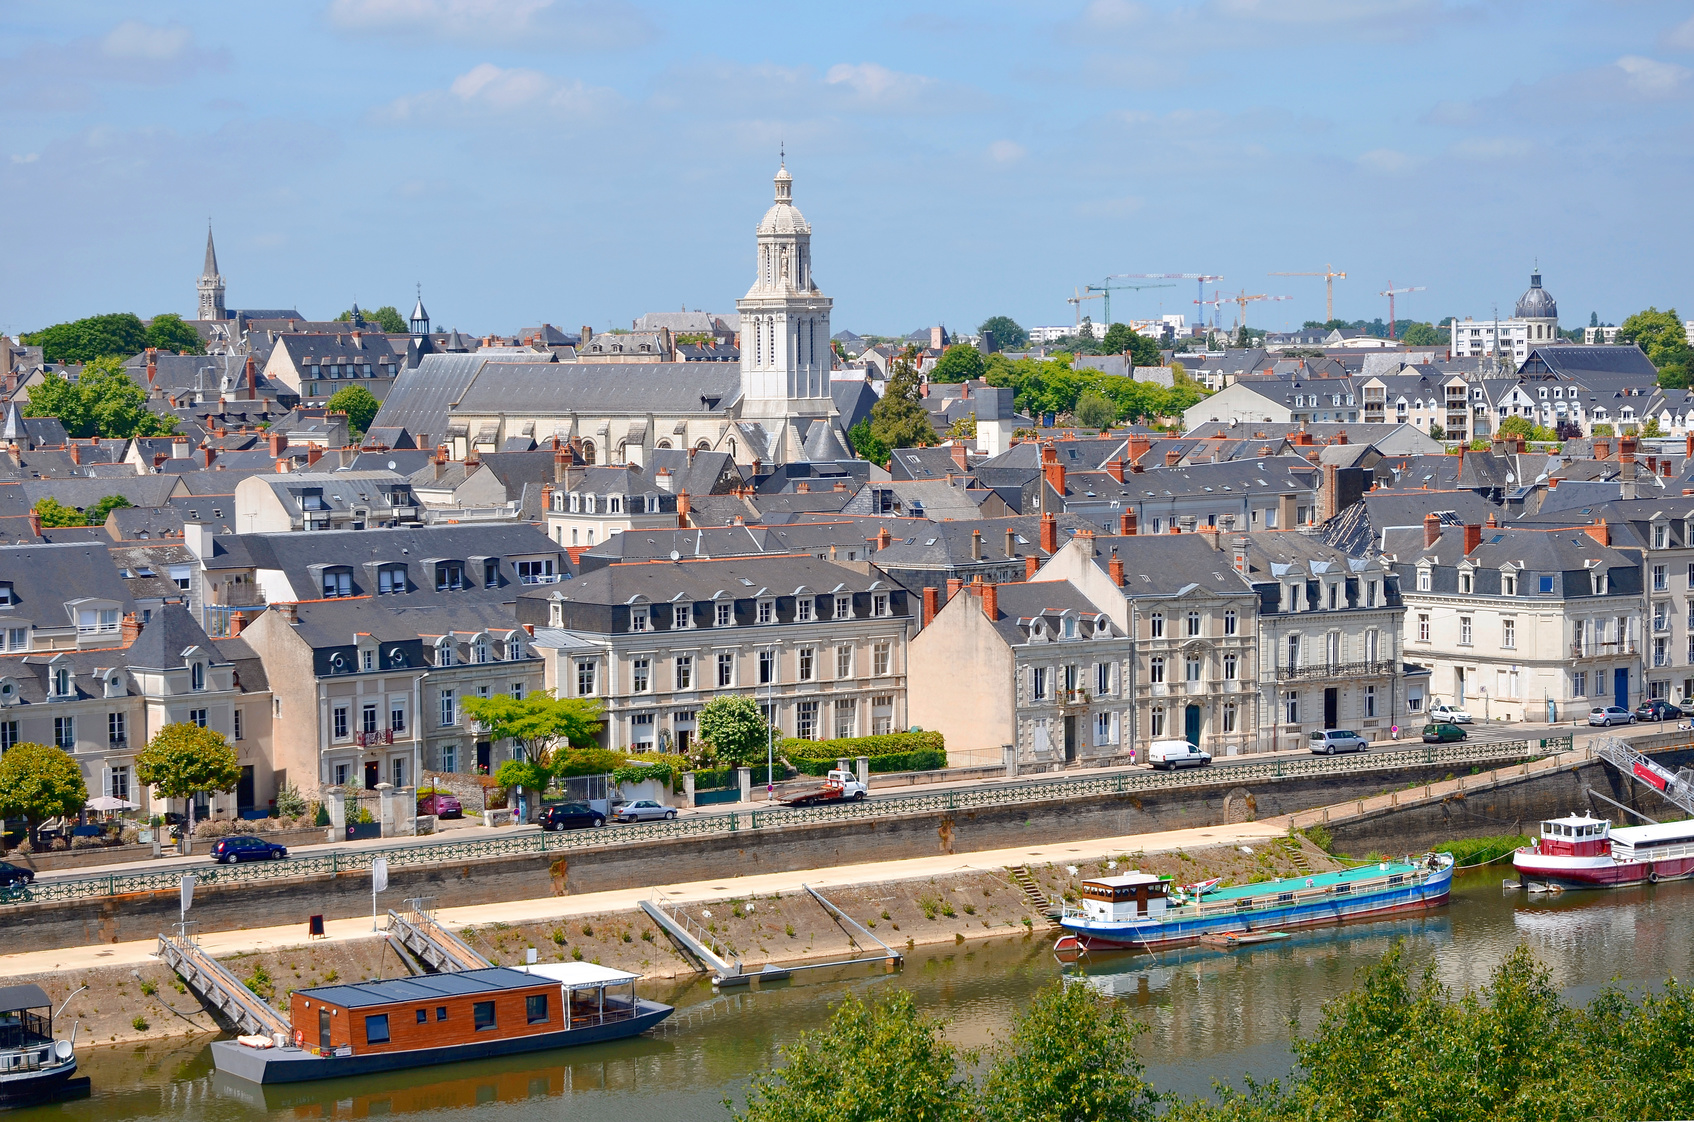 20190523101913-angers-fotolia-67668324-subscription-monthly-m-614b710b8fdfb047678788.jpg